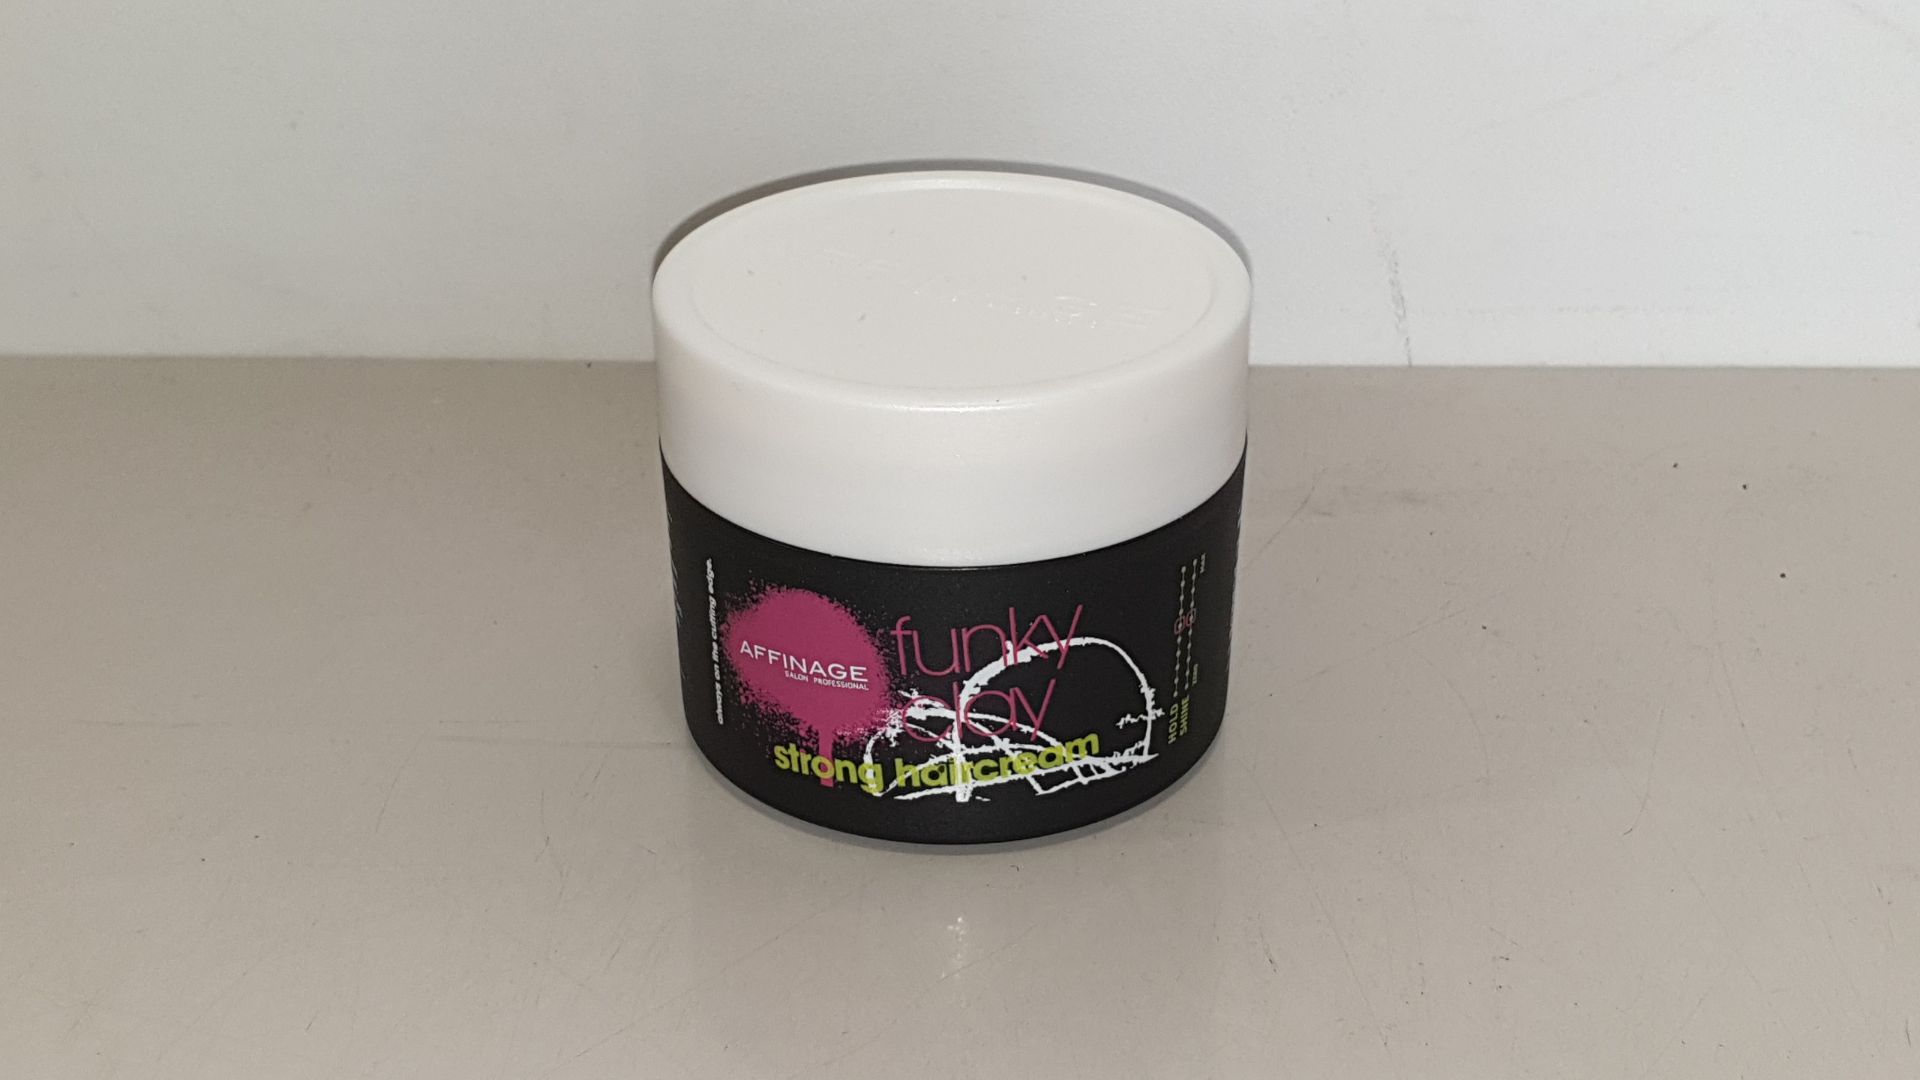 96 X AFFINAGE FUNKY DAY STRONG HAIRCREAM 75 ML (PROD CODE AP/FCLAY-75-A) - RRP £8.95 EACH TOTAL £859